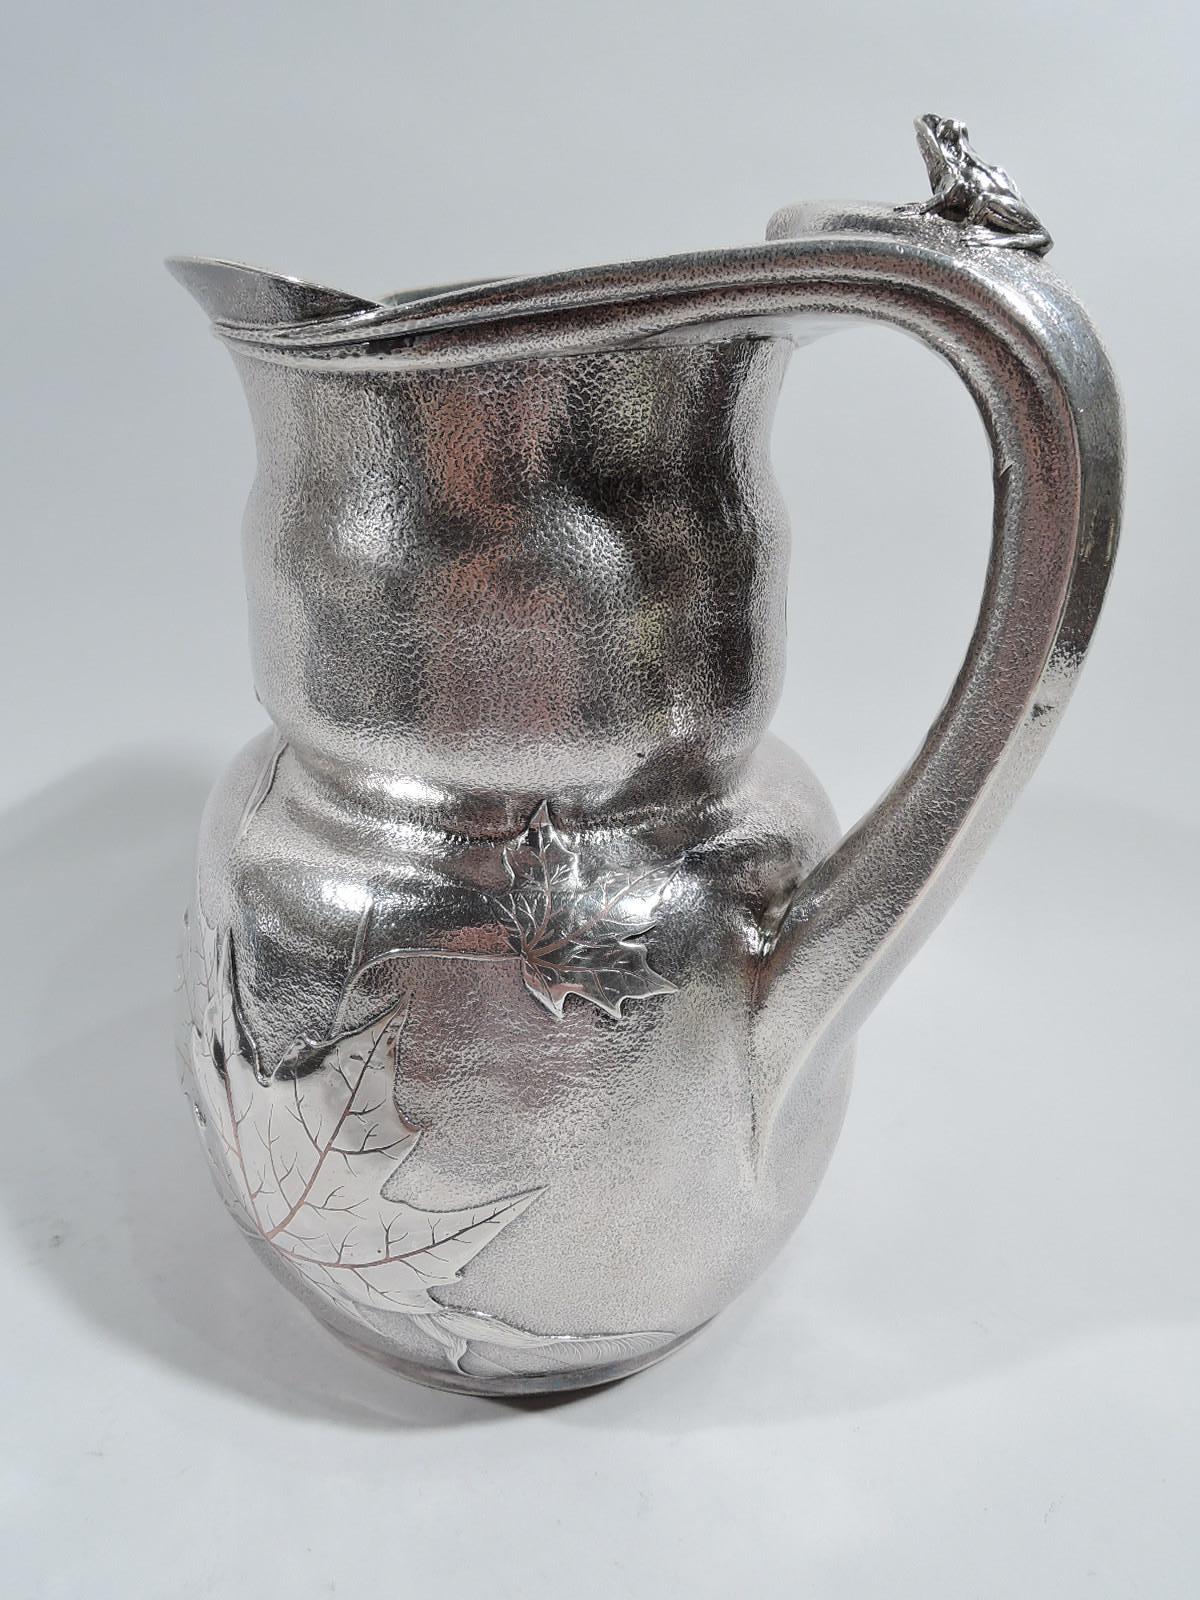 Market-fresh Japonesque mixed metal and sterling silver water pitcher. Made by Tiffany & Co. in New York. Gently curved bowl and inset undulating rim with wide lip spout and integral scroll handle with tendril mounts that wraparound mouth rim.